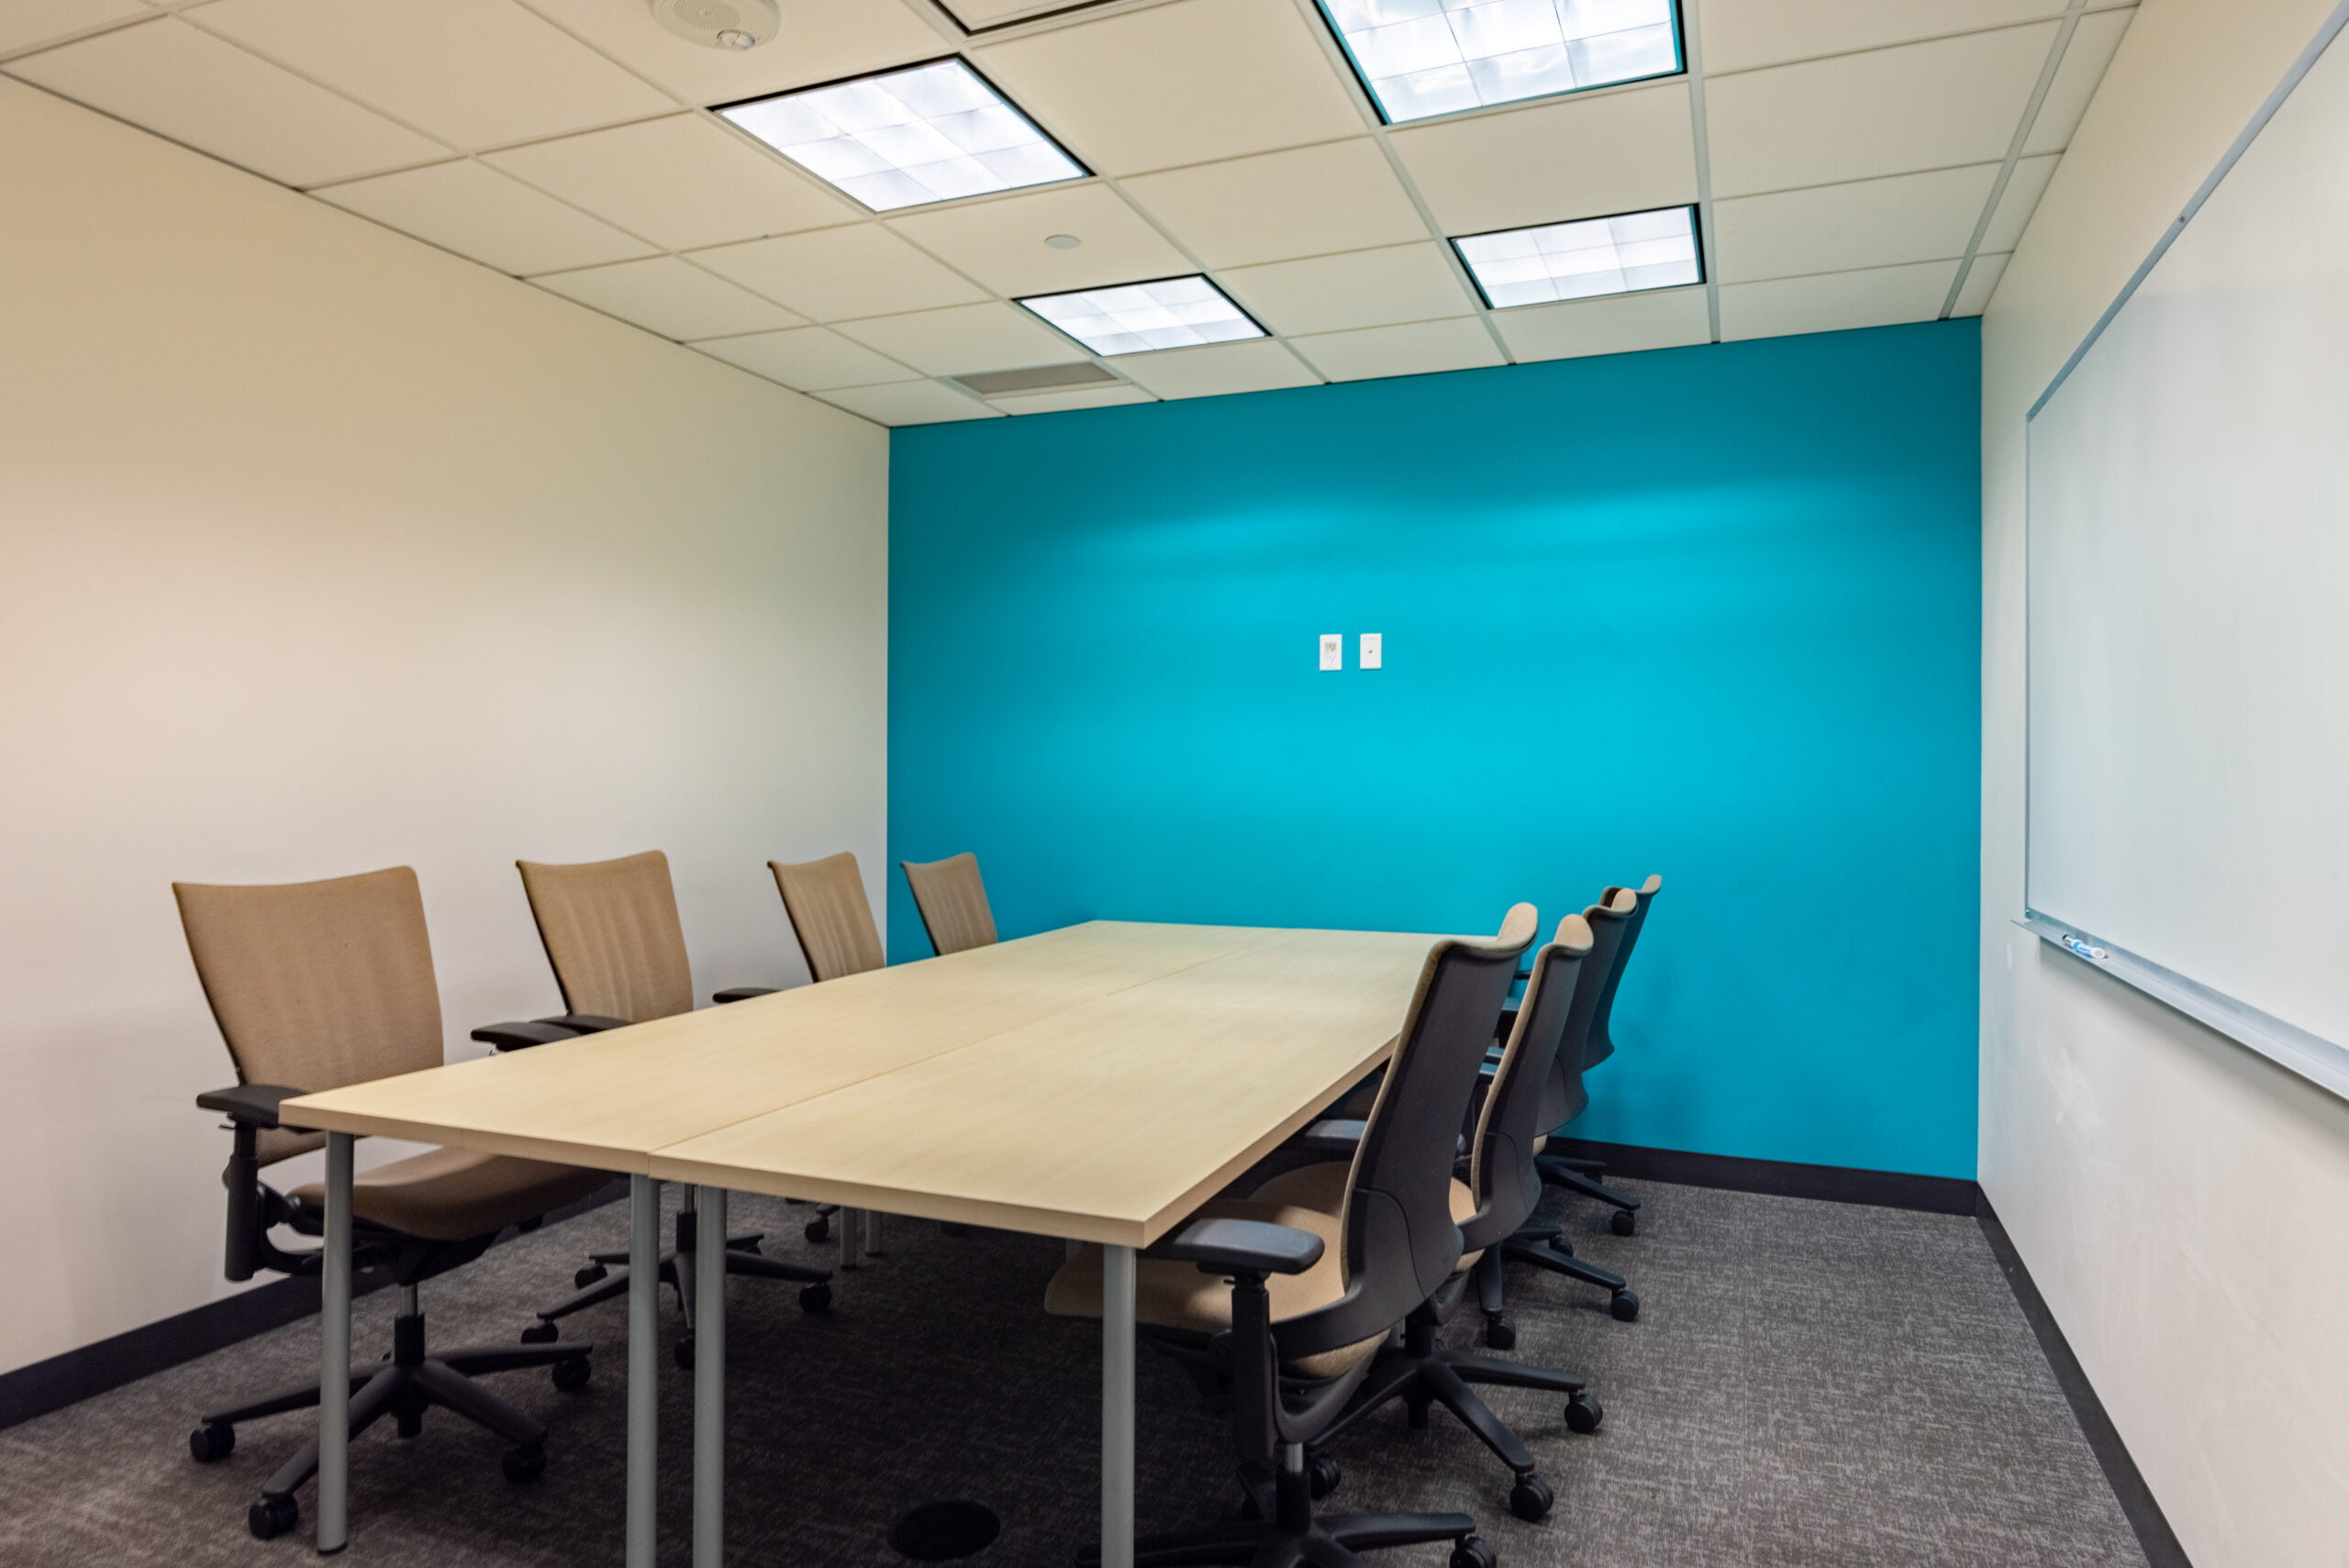 Lanai customizable meeting room for rent by the hour at SURF Incubator in downtown Seattle Washington